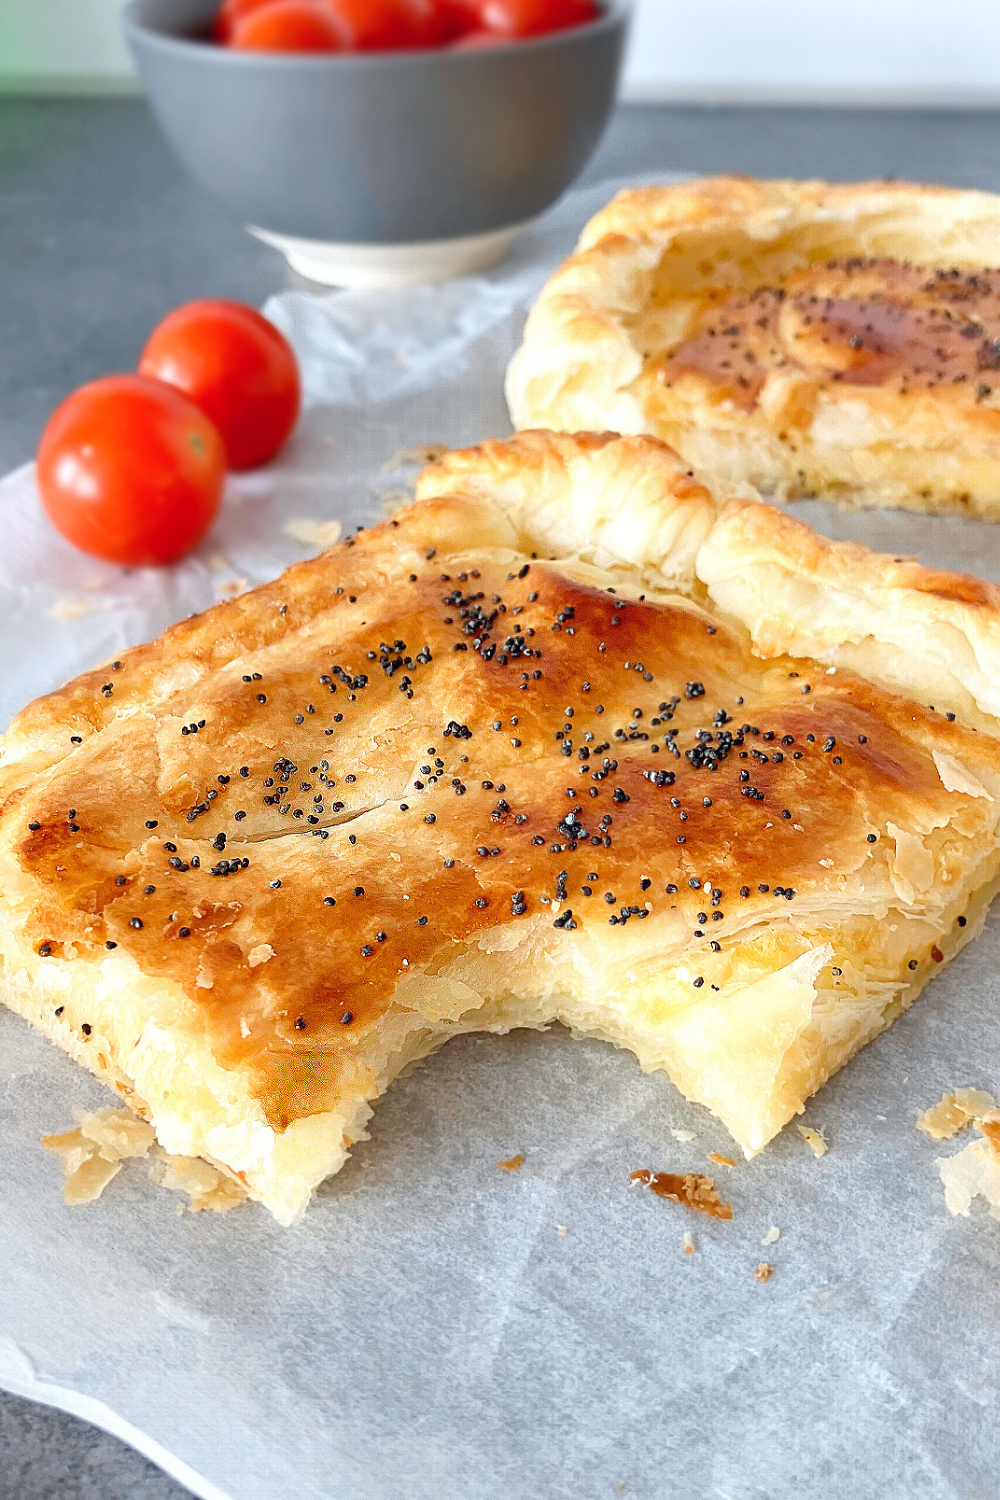 Savoury Cheese and Onion Puff Pastry Slices